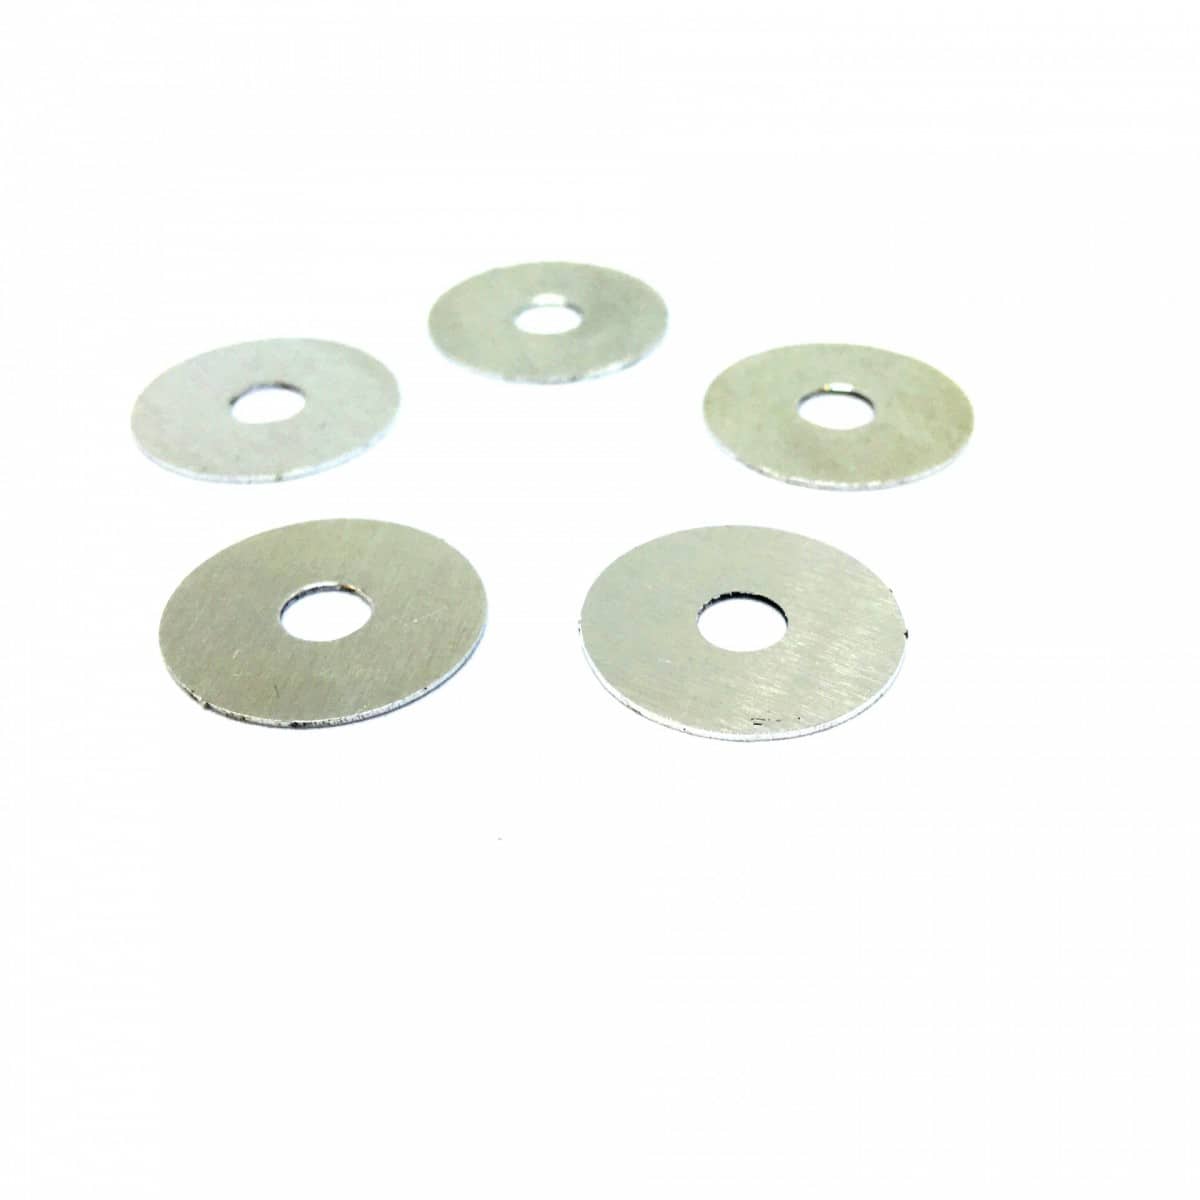 EPES Piston head AOE spacer pad 0.5mm - 5 pack